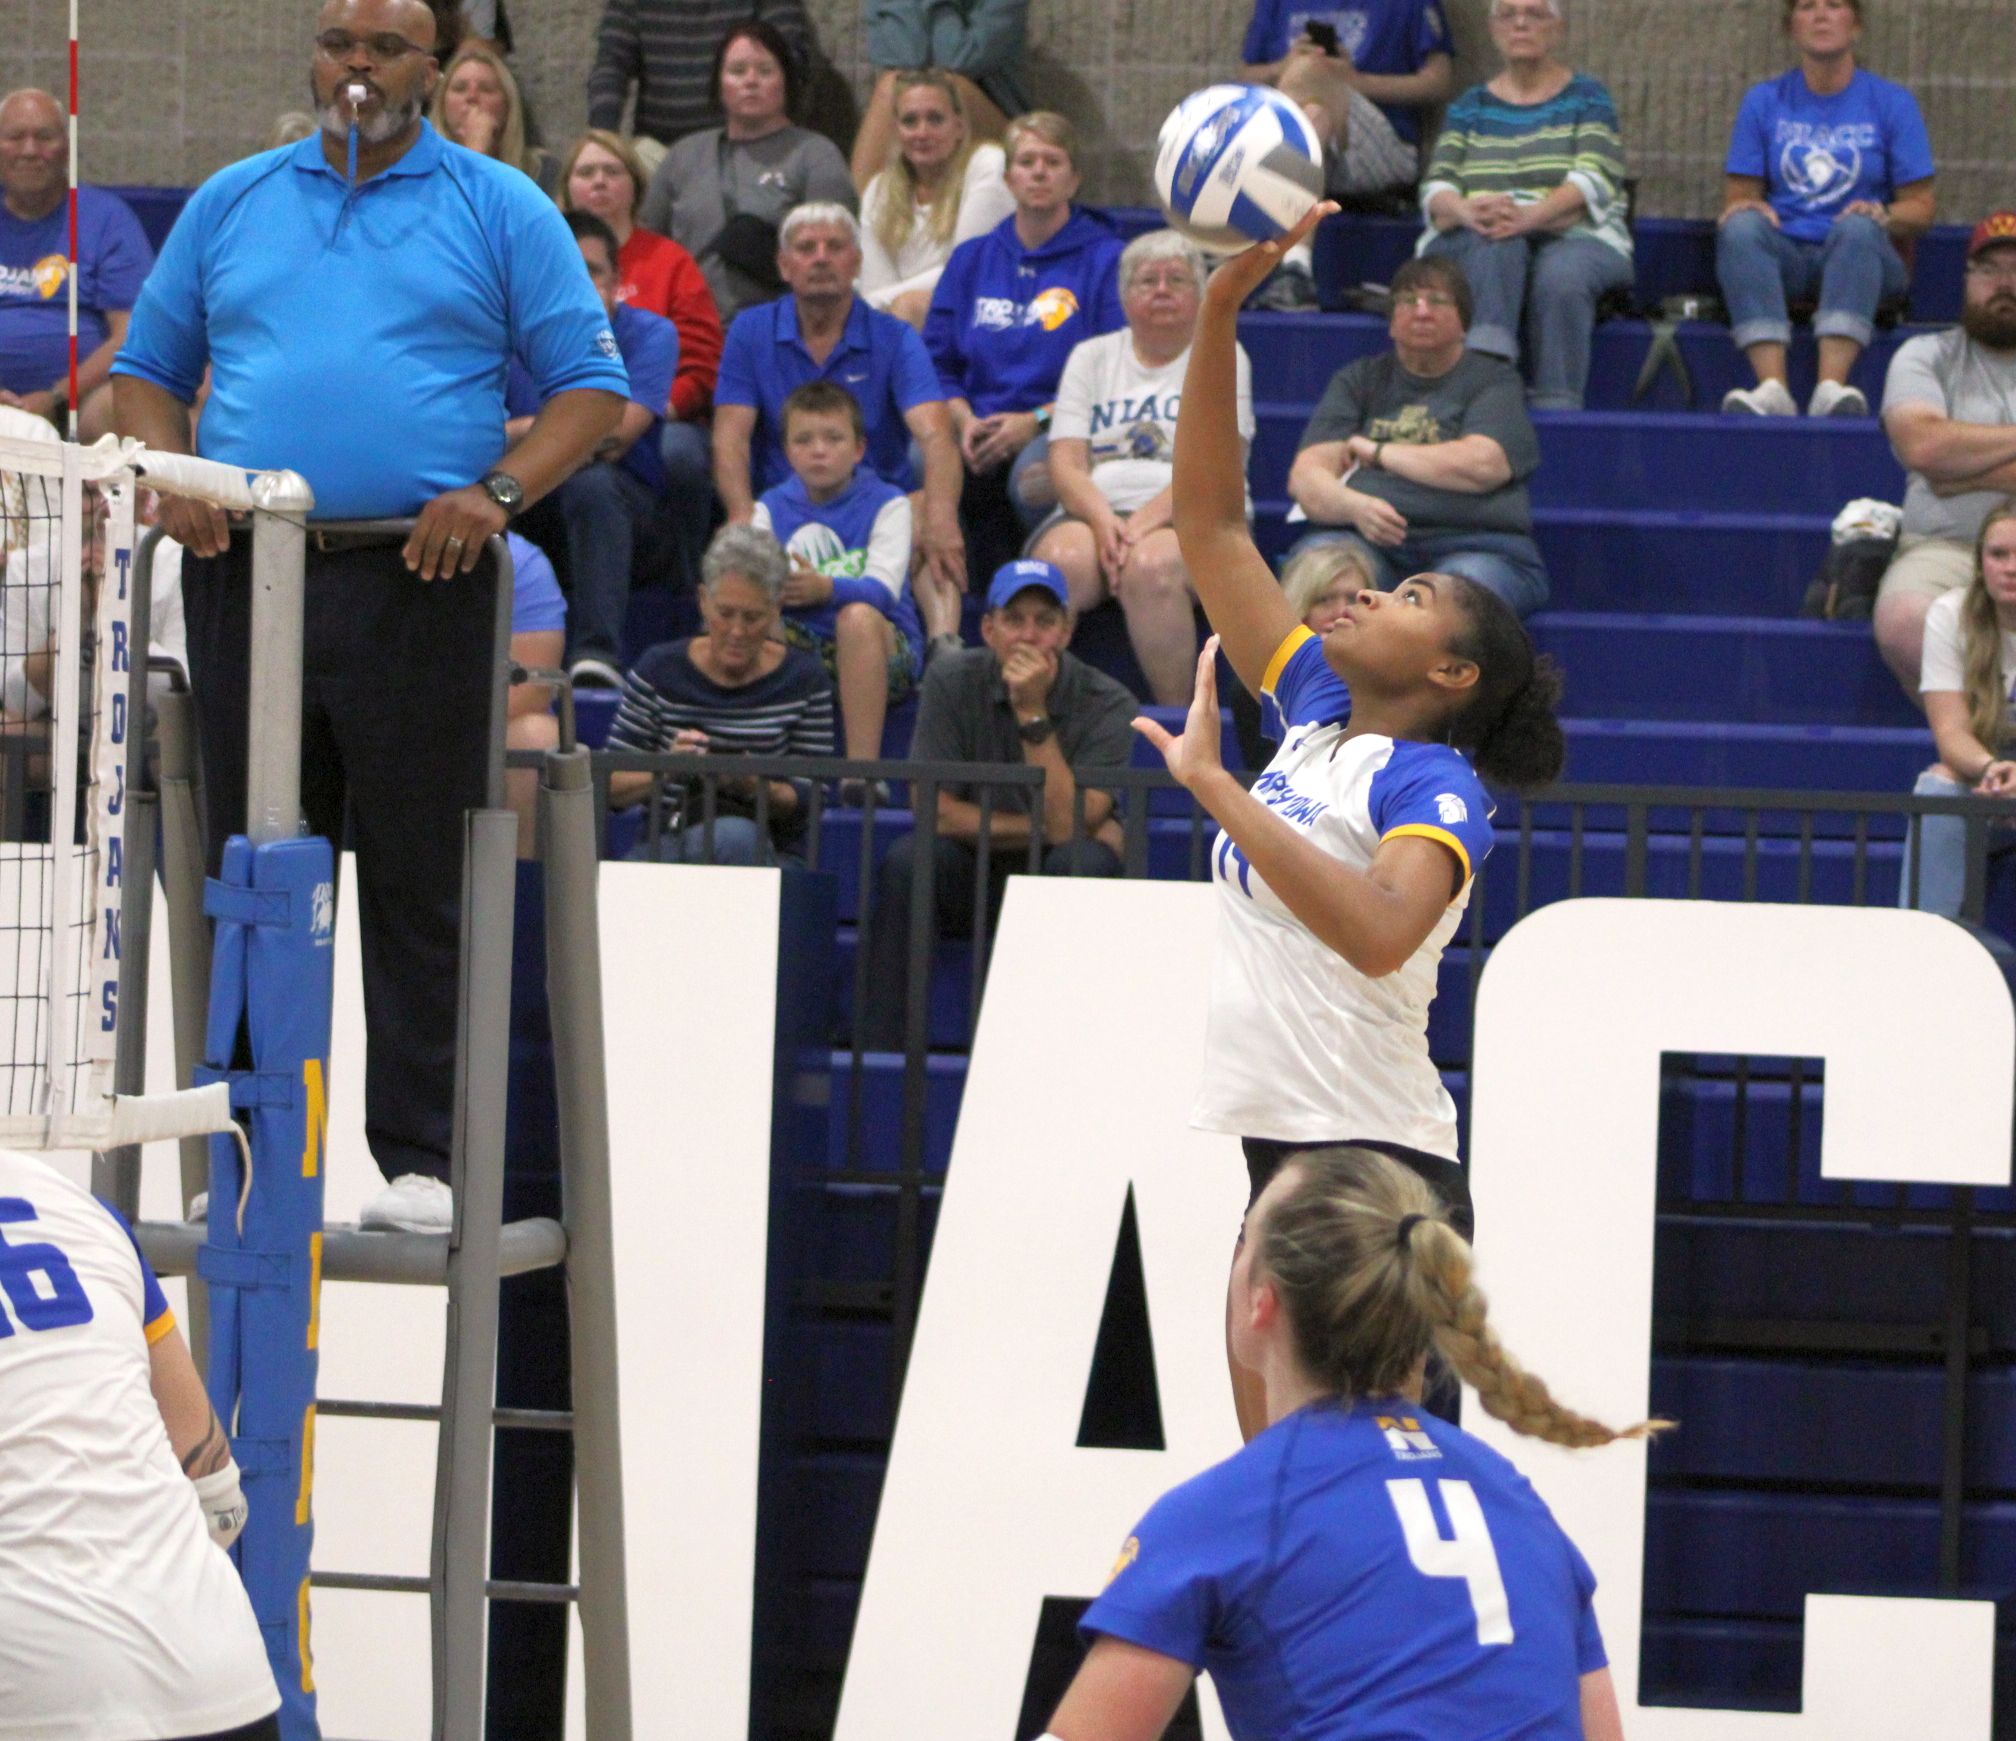 NIACC freshman Zhane Singer hits the ball over the net in Tuesday's match against Iowa Central.